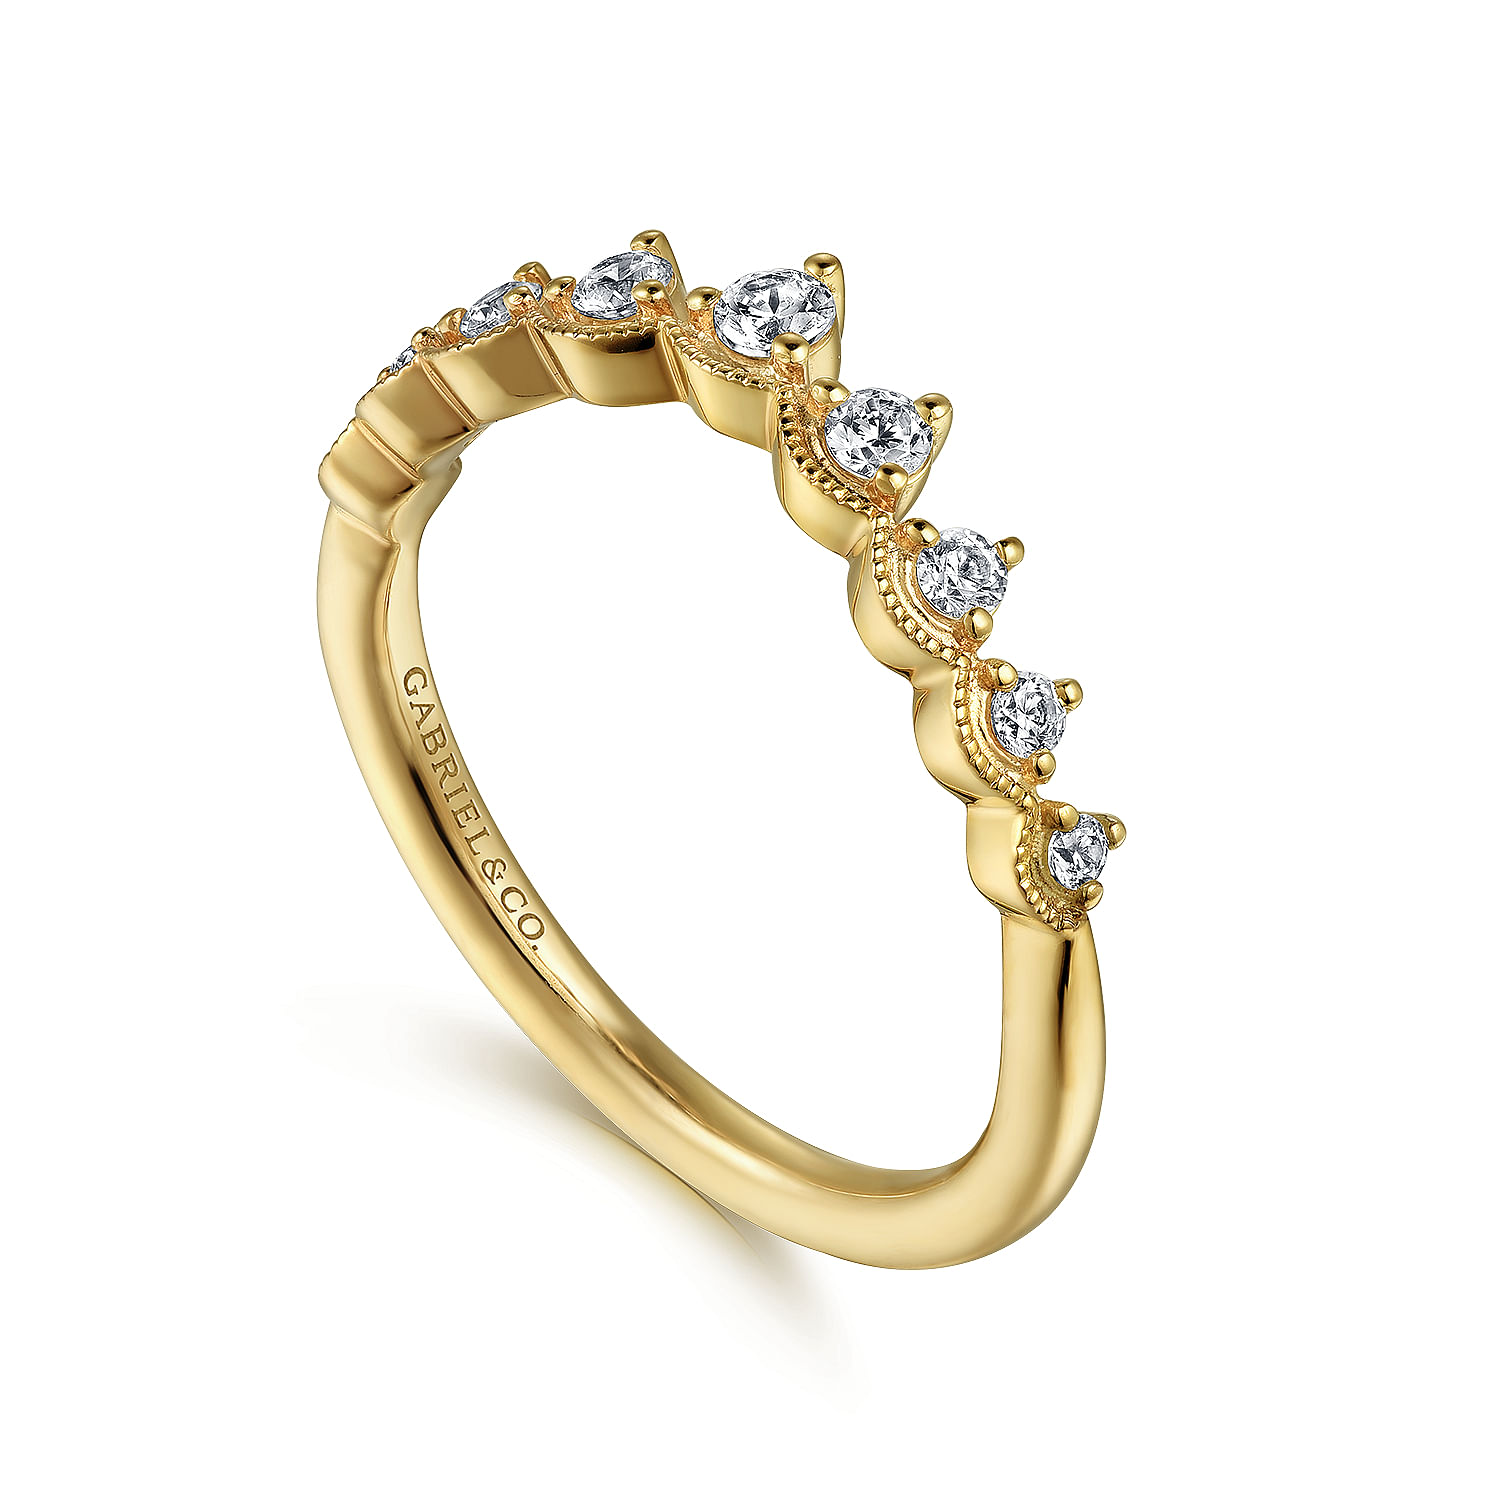 Vintage Inspired 14K Yellow Gold Curved Diamond Anniversary Band